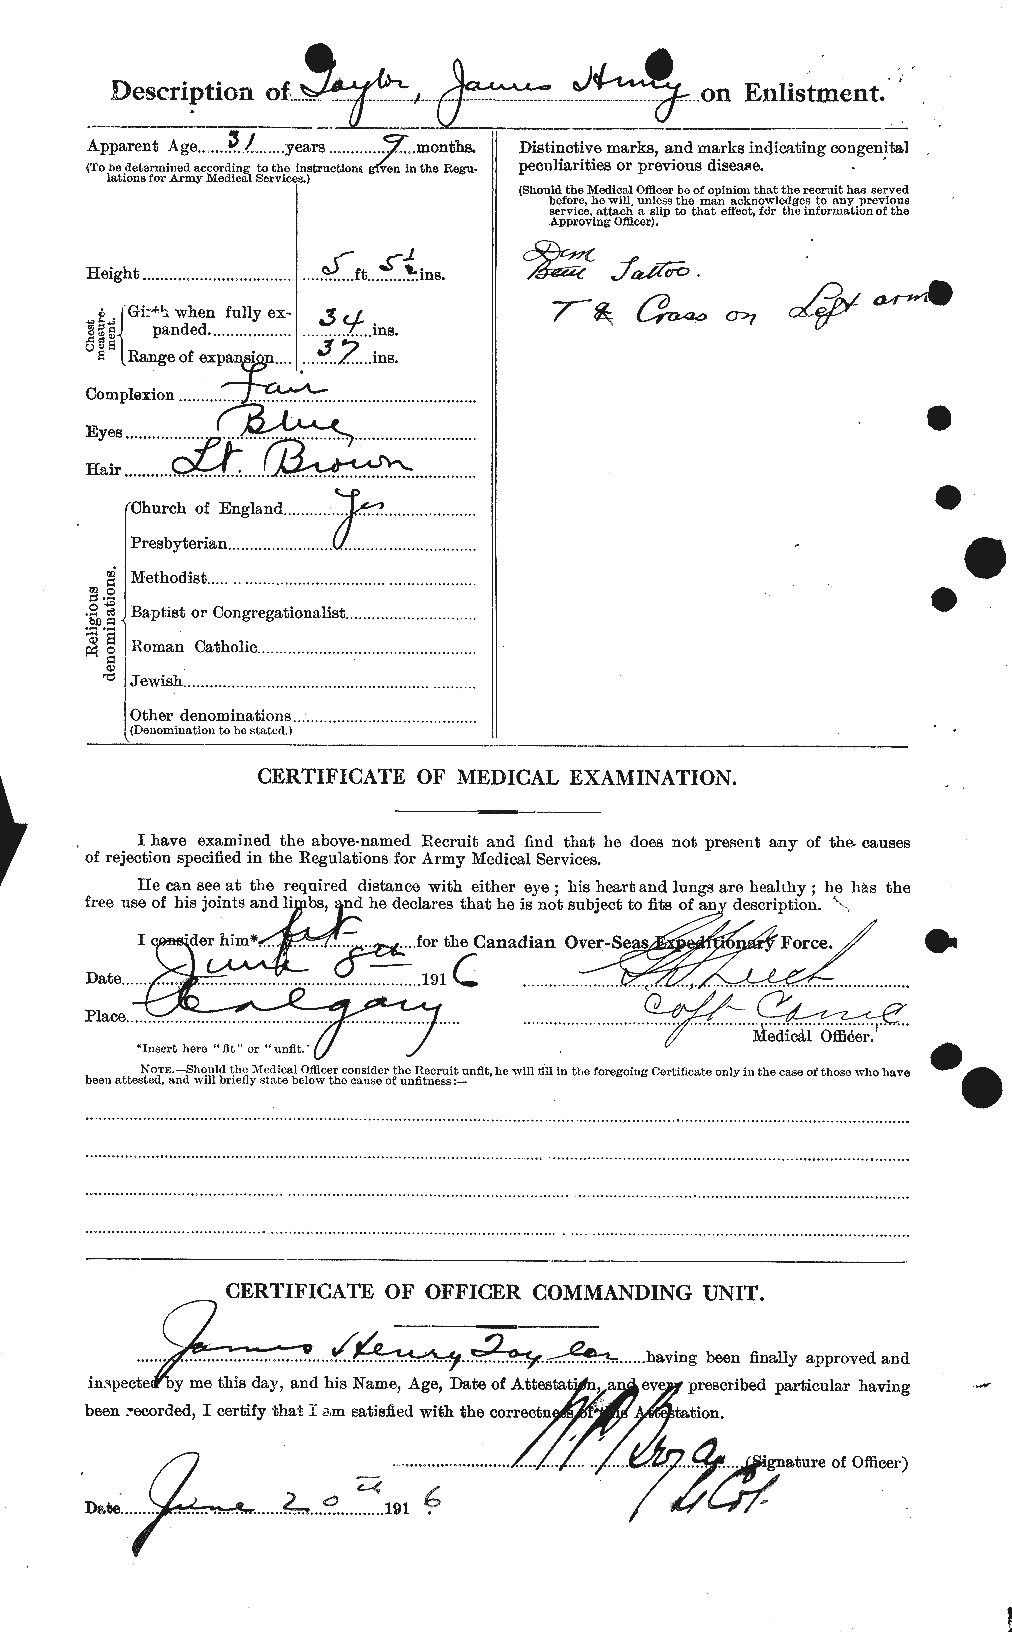 Personnel Records of the First World War - CEF 626931b